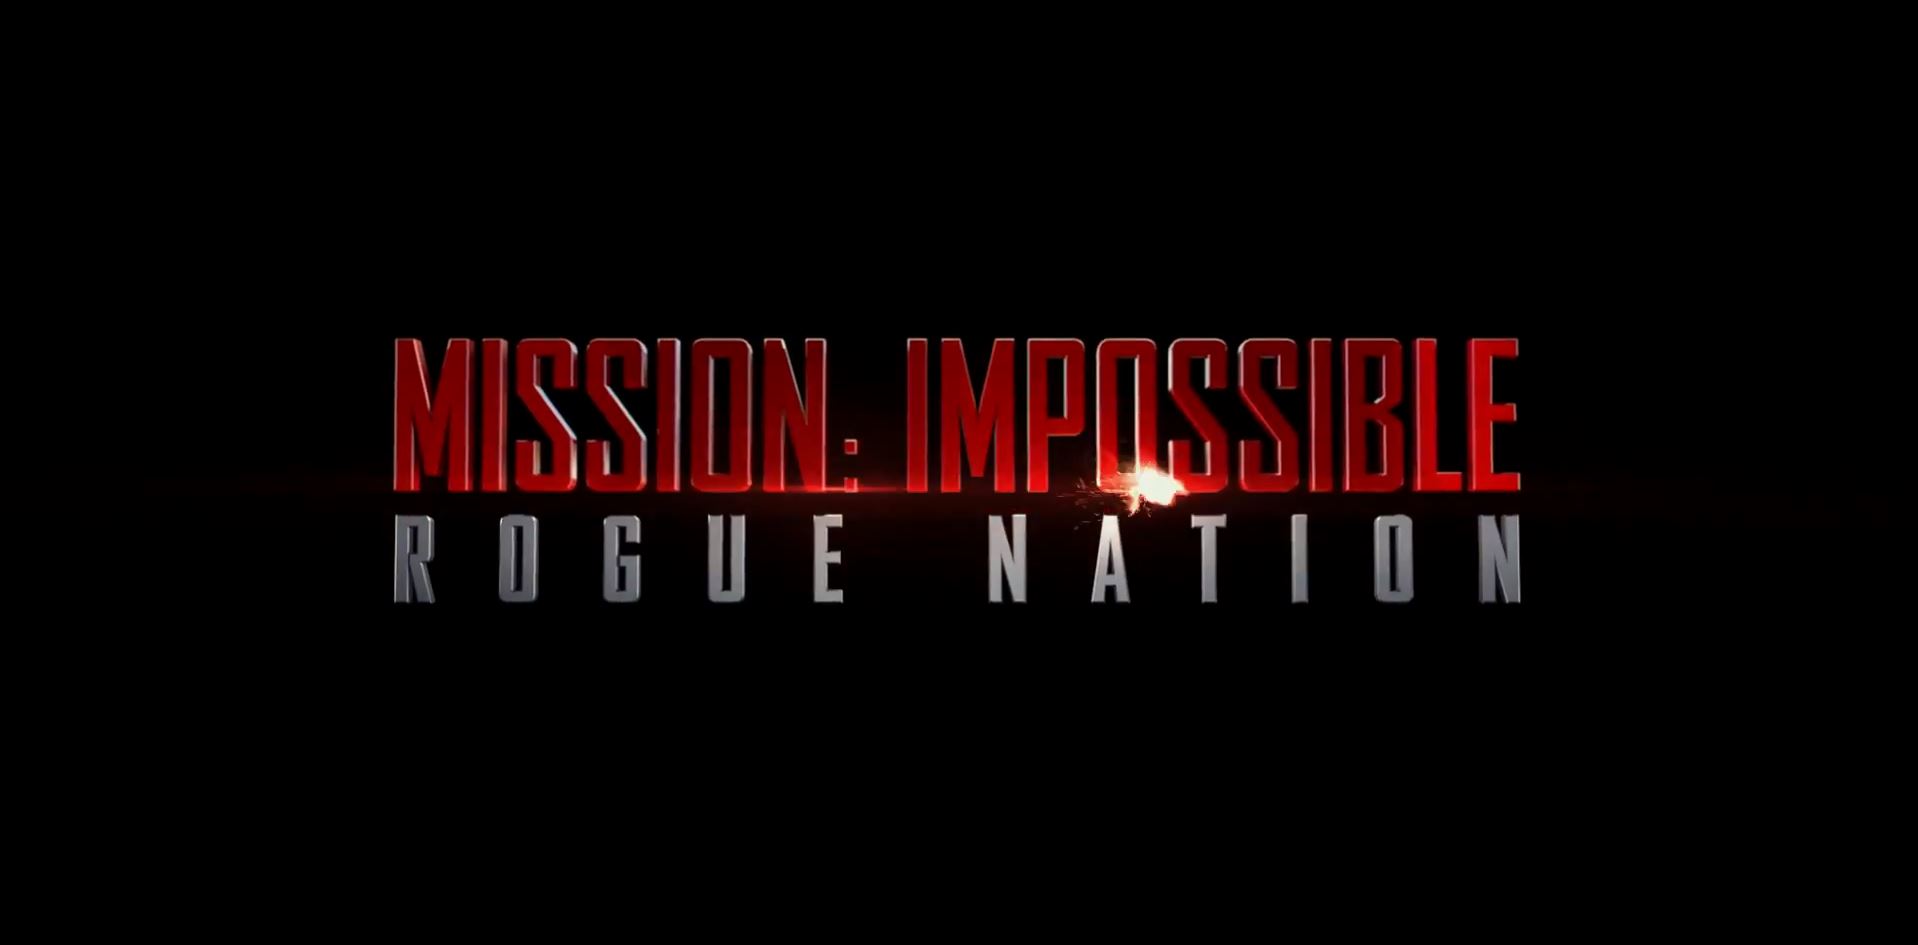 Mission Impossible Rogue Nation title card.